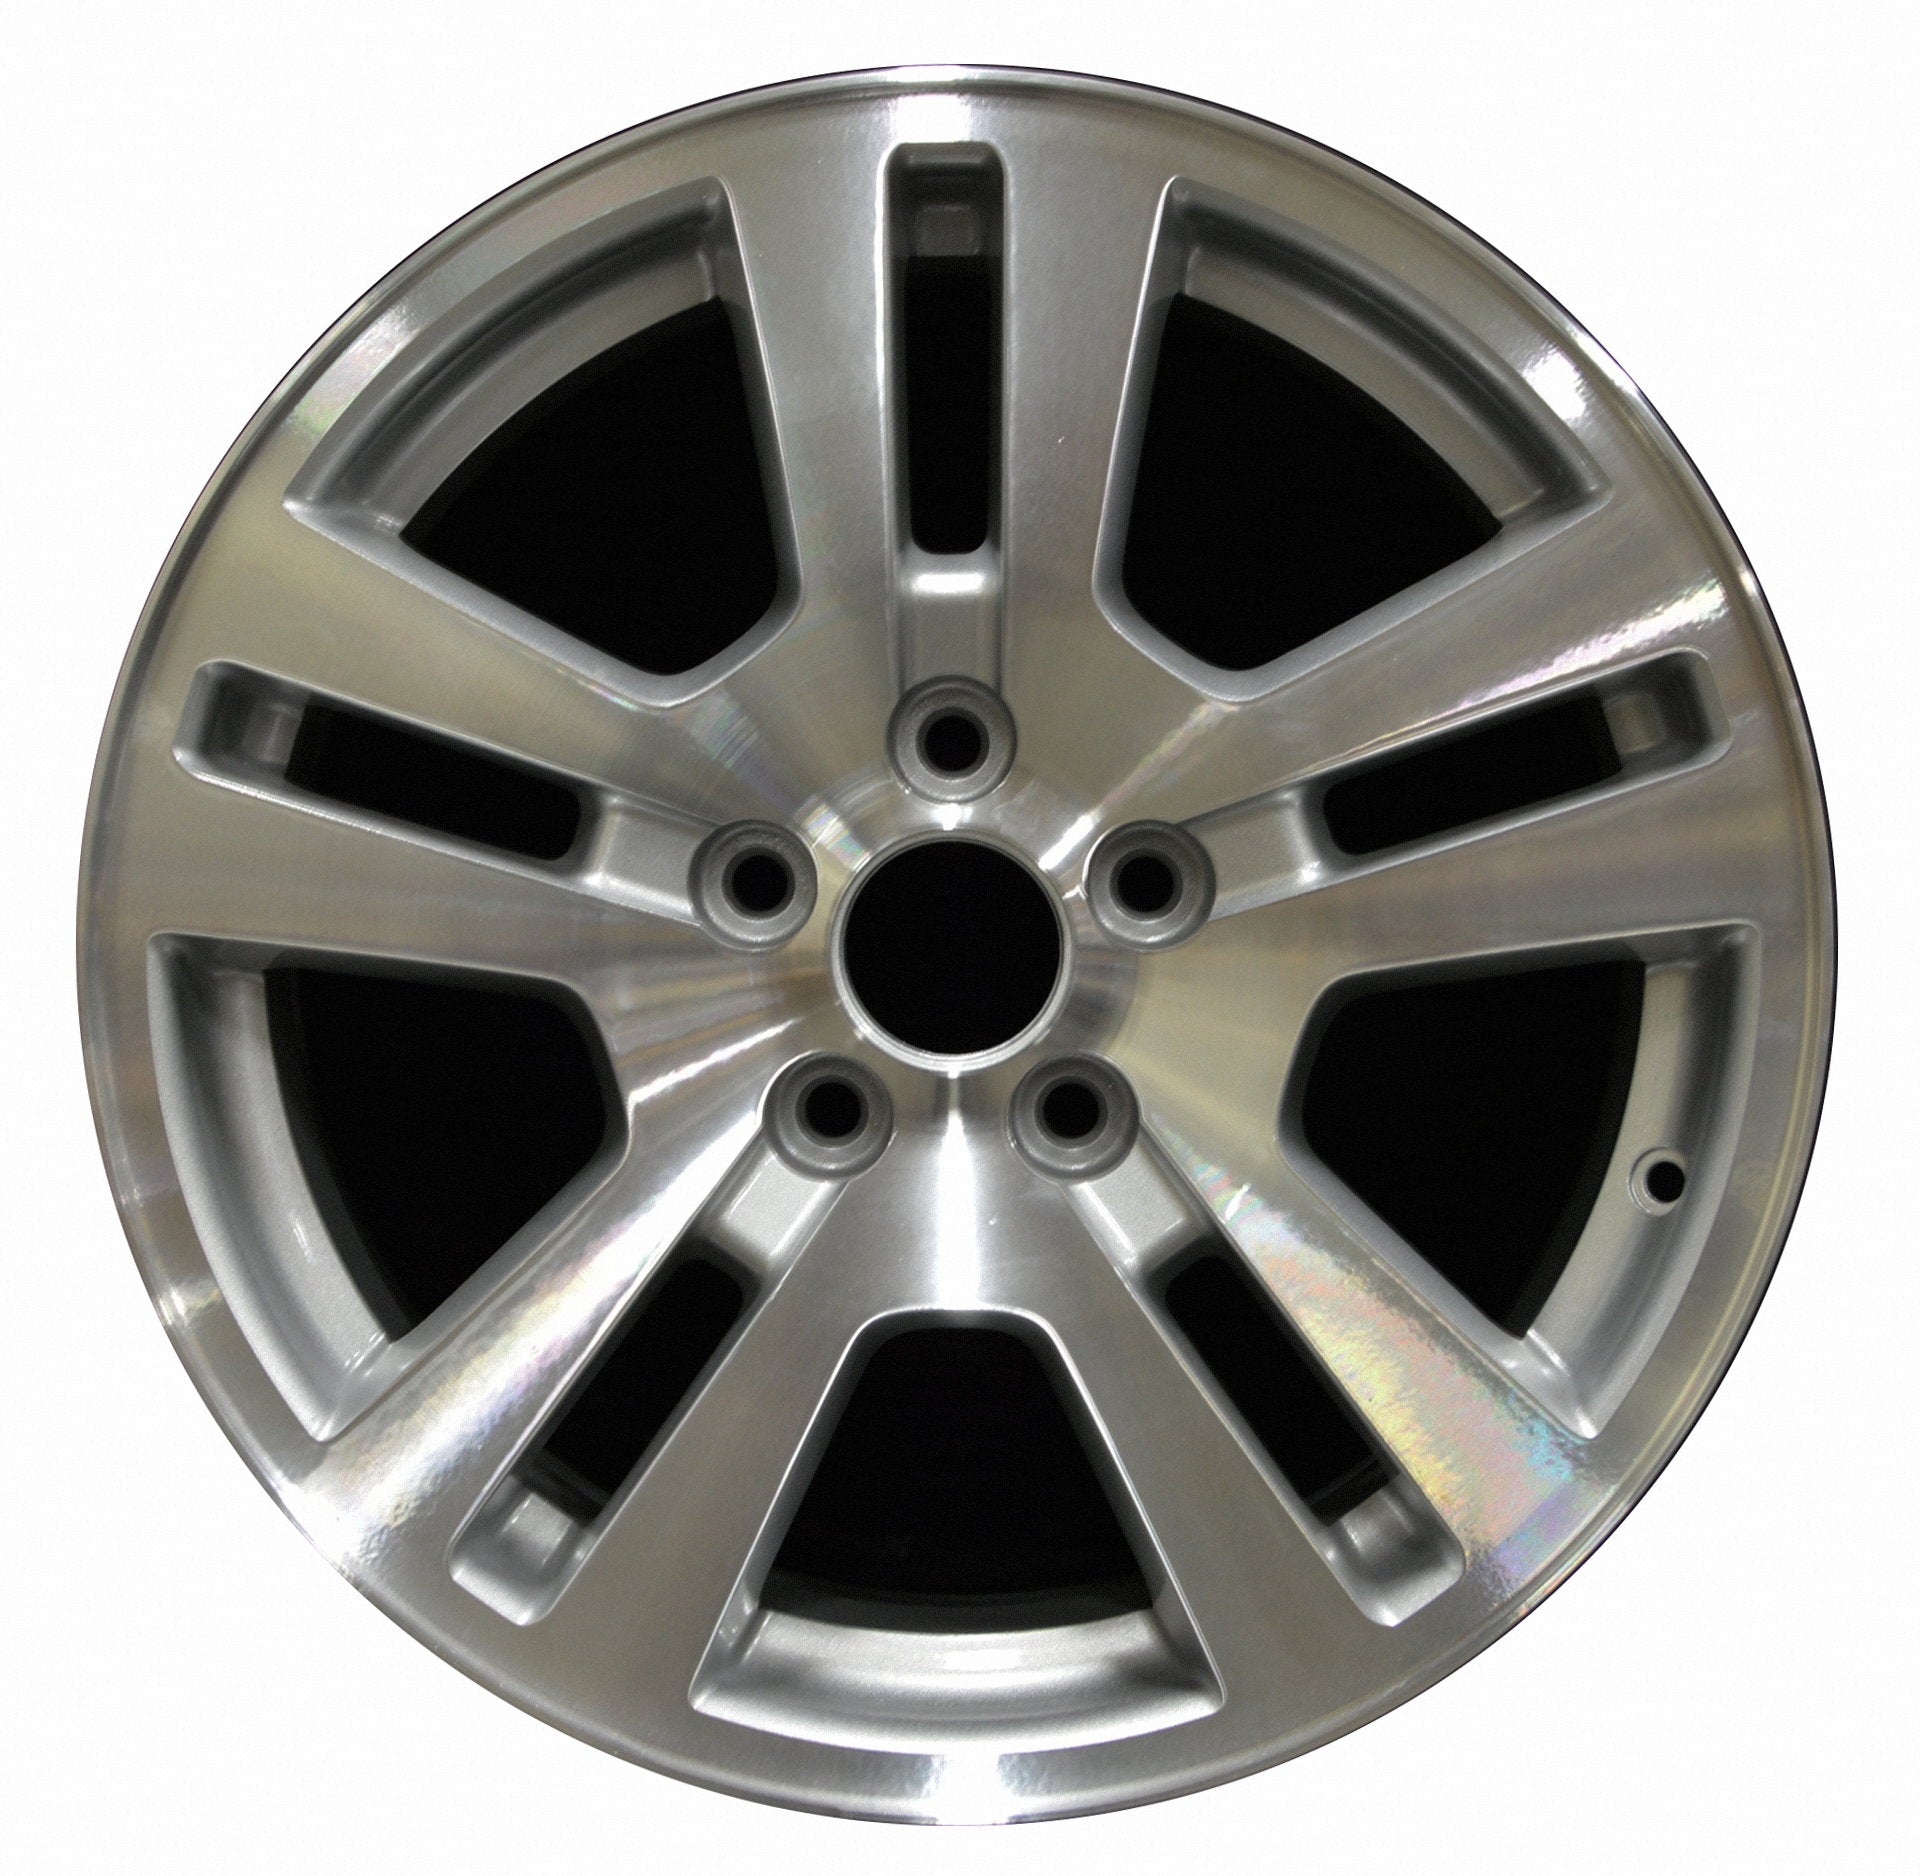 Ford Edge  2007, 2008, 2009, 2010, 2011, 2012 Factory OEM Car Wheel Size 17x7.5 Alloy WAO.3672.PS02.MA